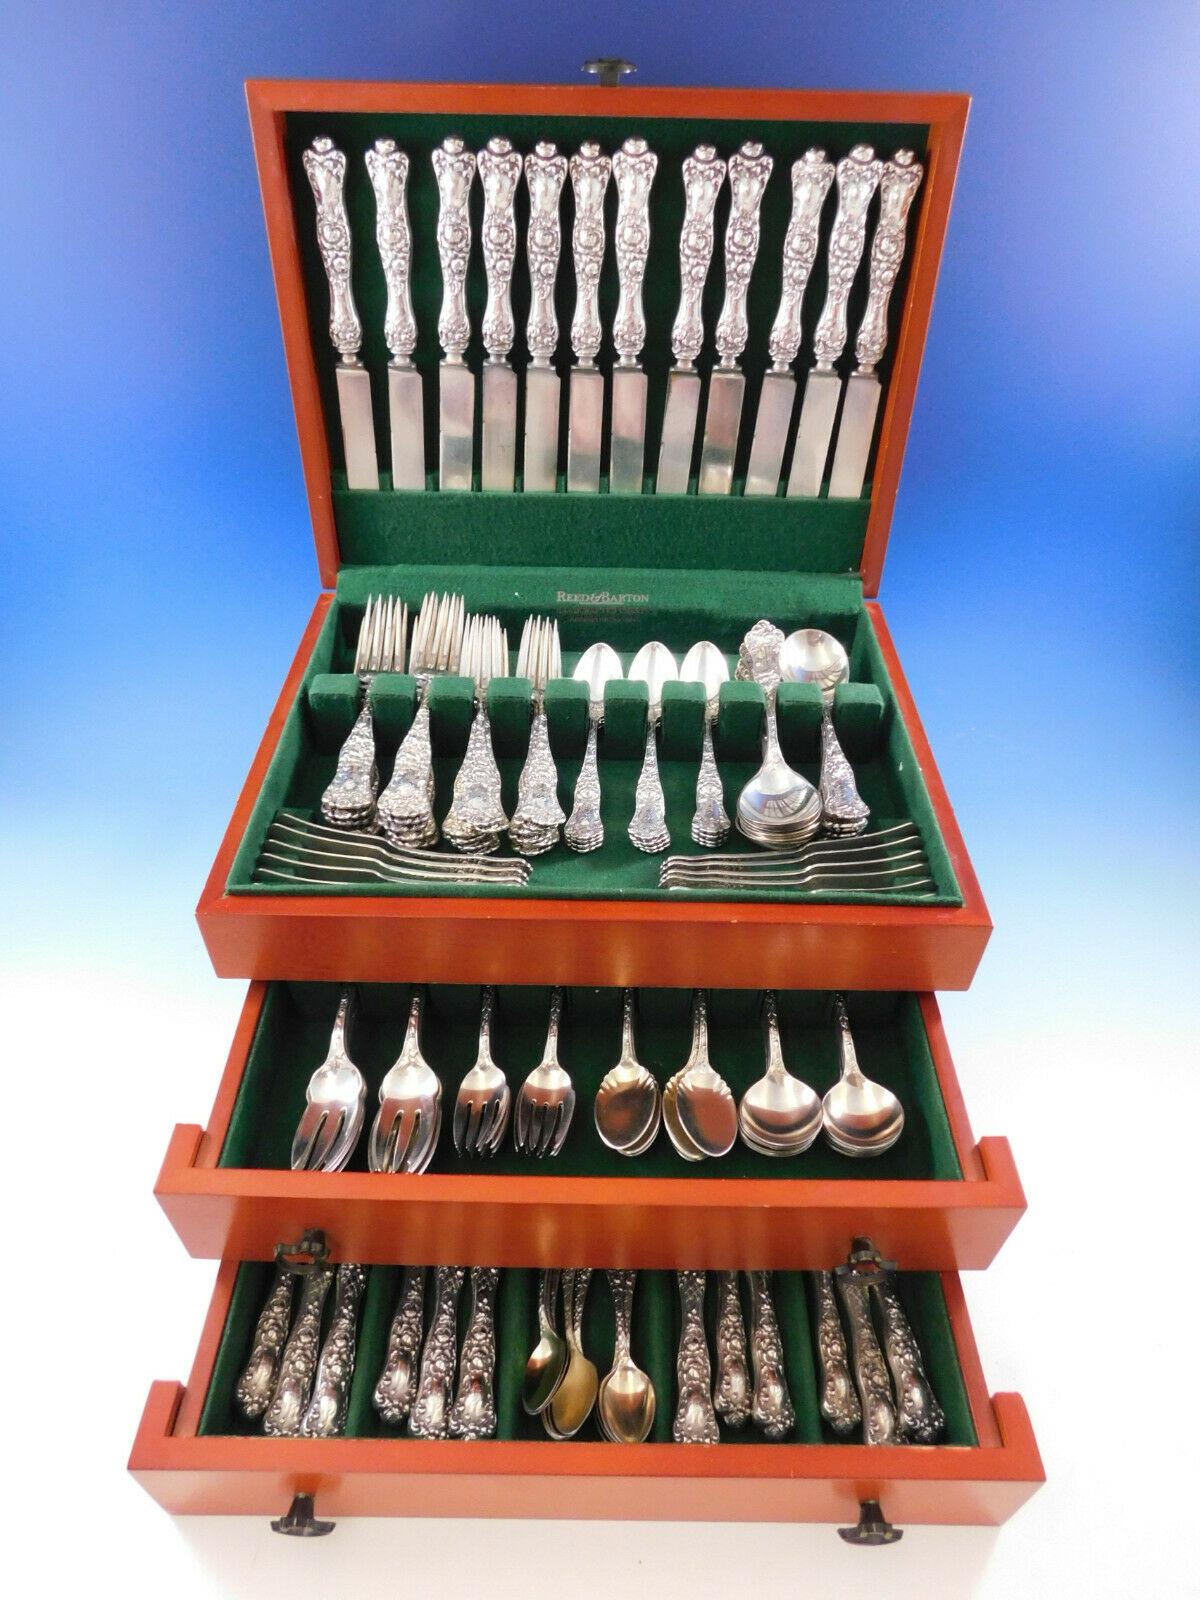 Monumental American beauty by Shiebler/Mauser sterling silver flatware set with rose motif, 144 pieces. This set includes:

12 dinner size knives w/blunt silver plated blades,10